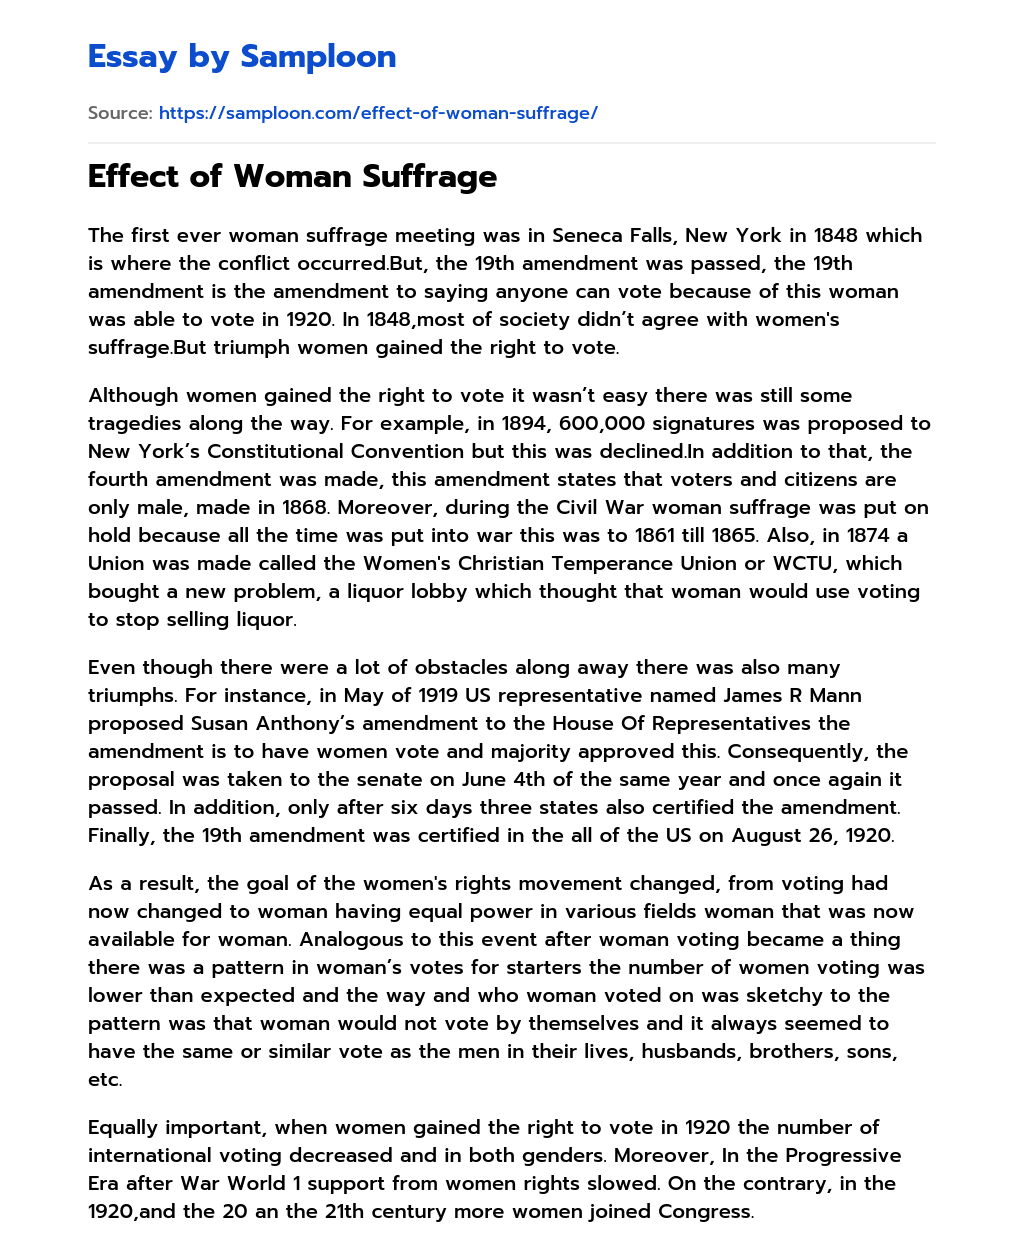 Effect of Woman Suffrage essay